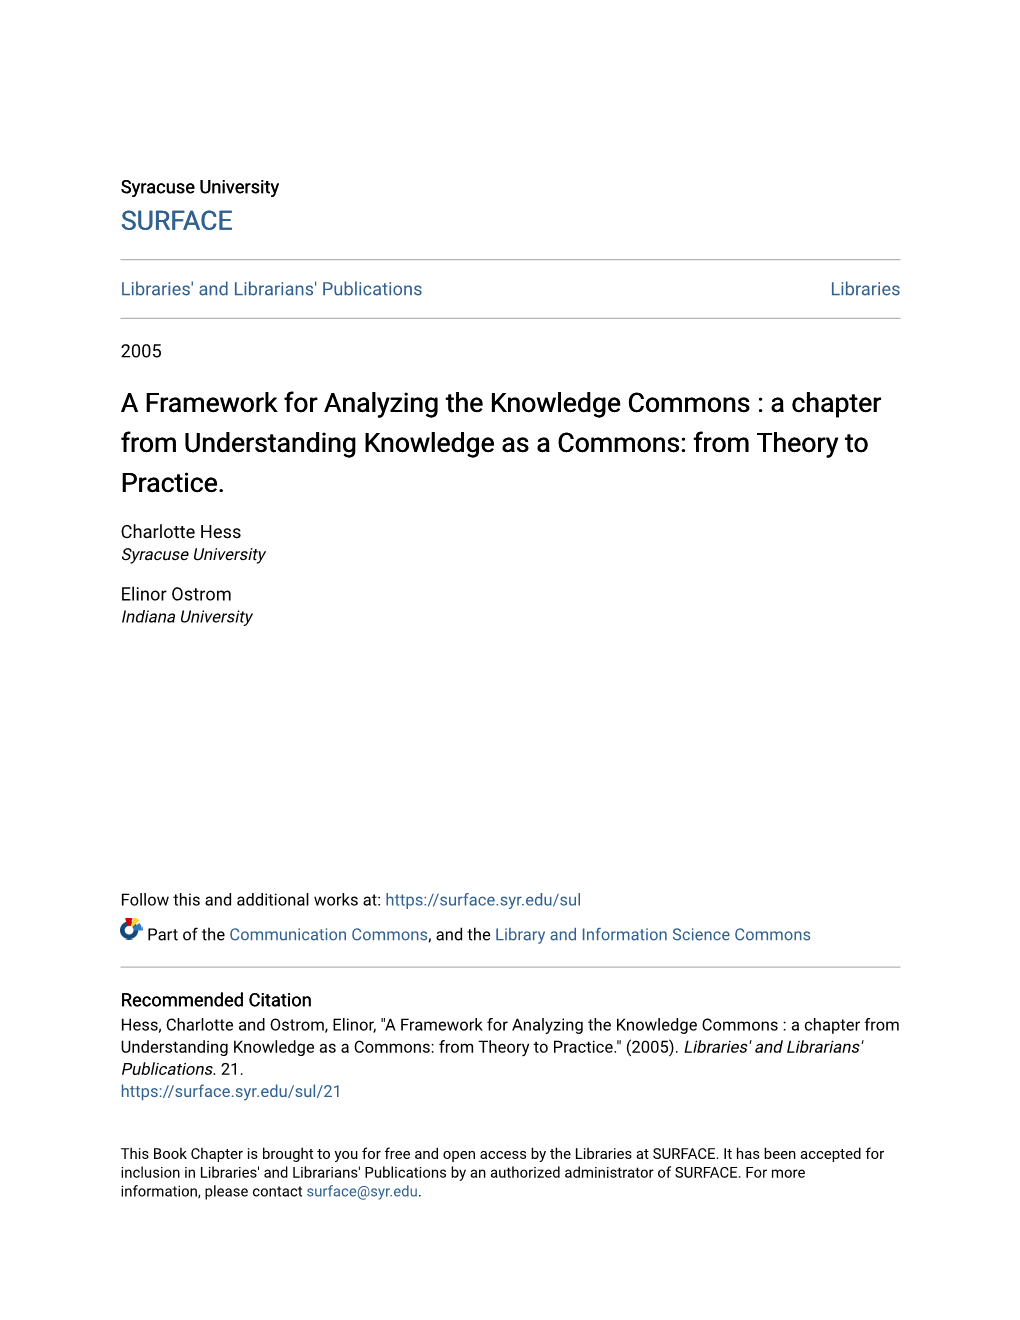 A Framework for Analyzing the Knowledge Commons : a Chapter from Understanding Knowledge As a Commons: from Theory to Practice